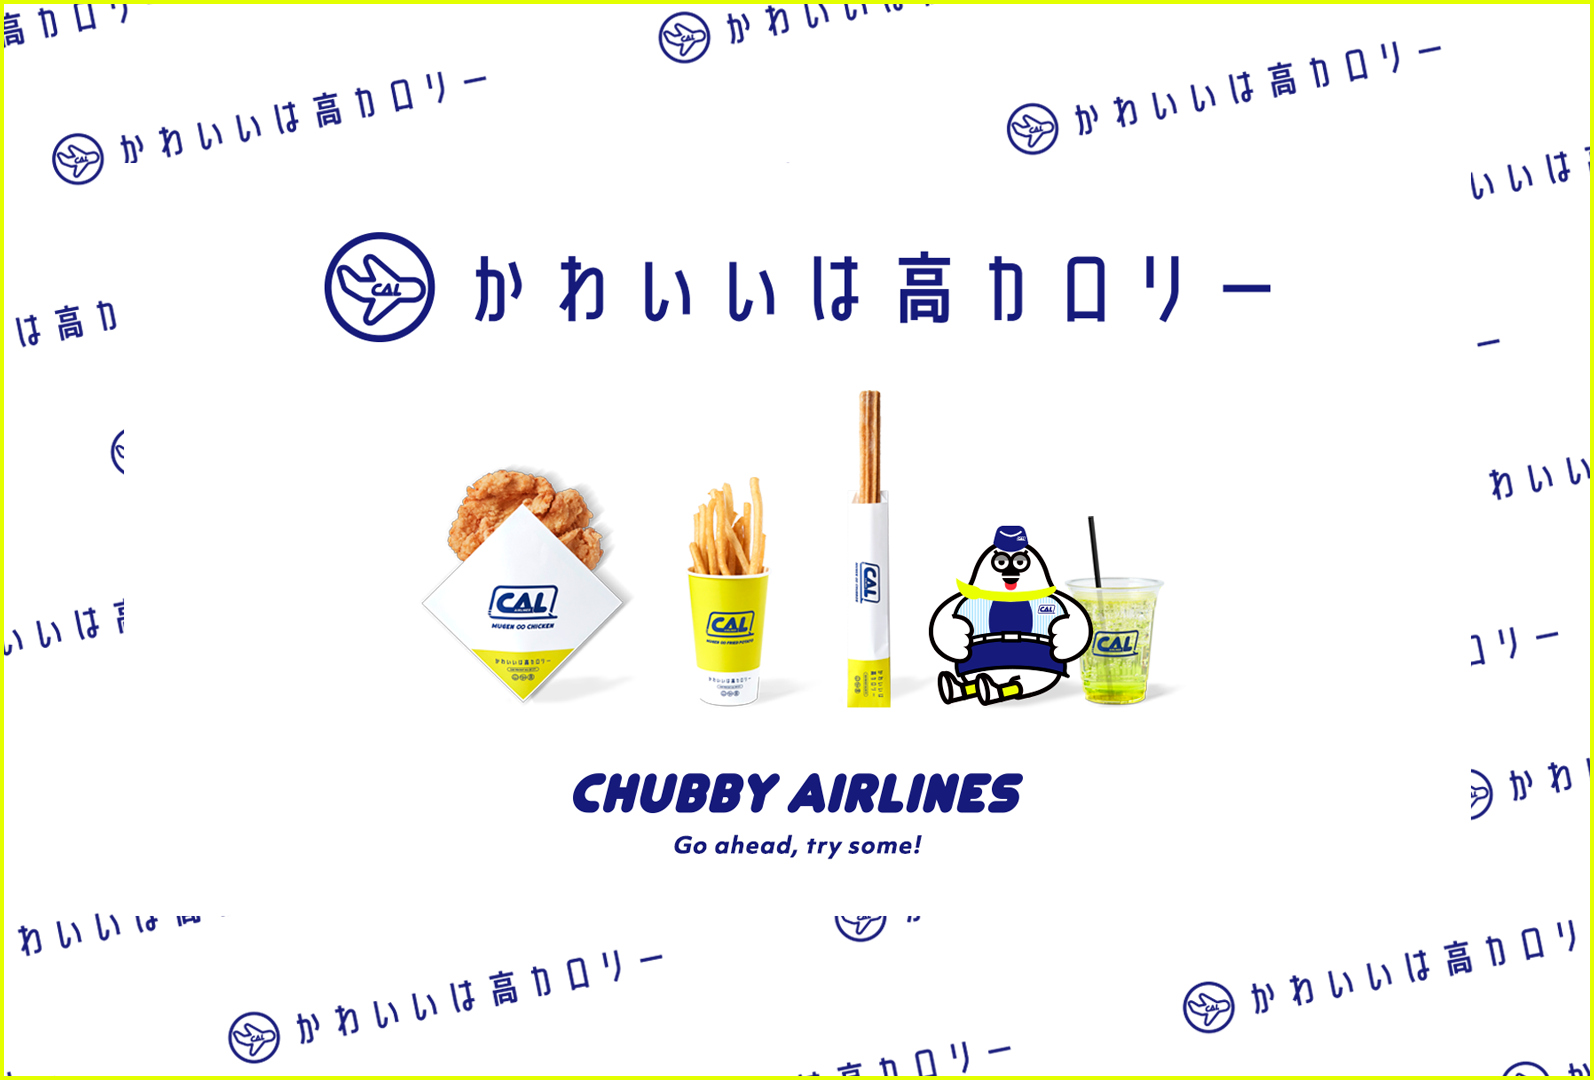 What's CHUBBY AIRLINES？